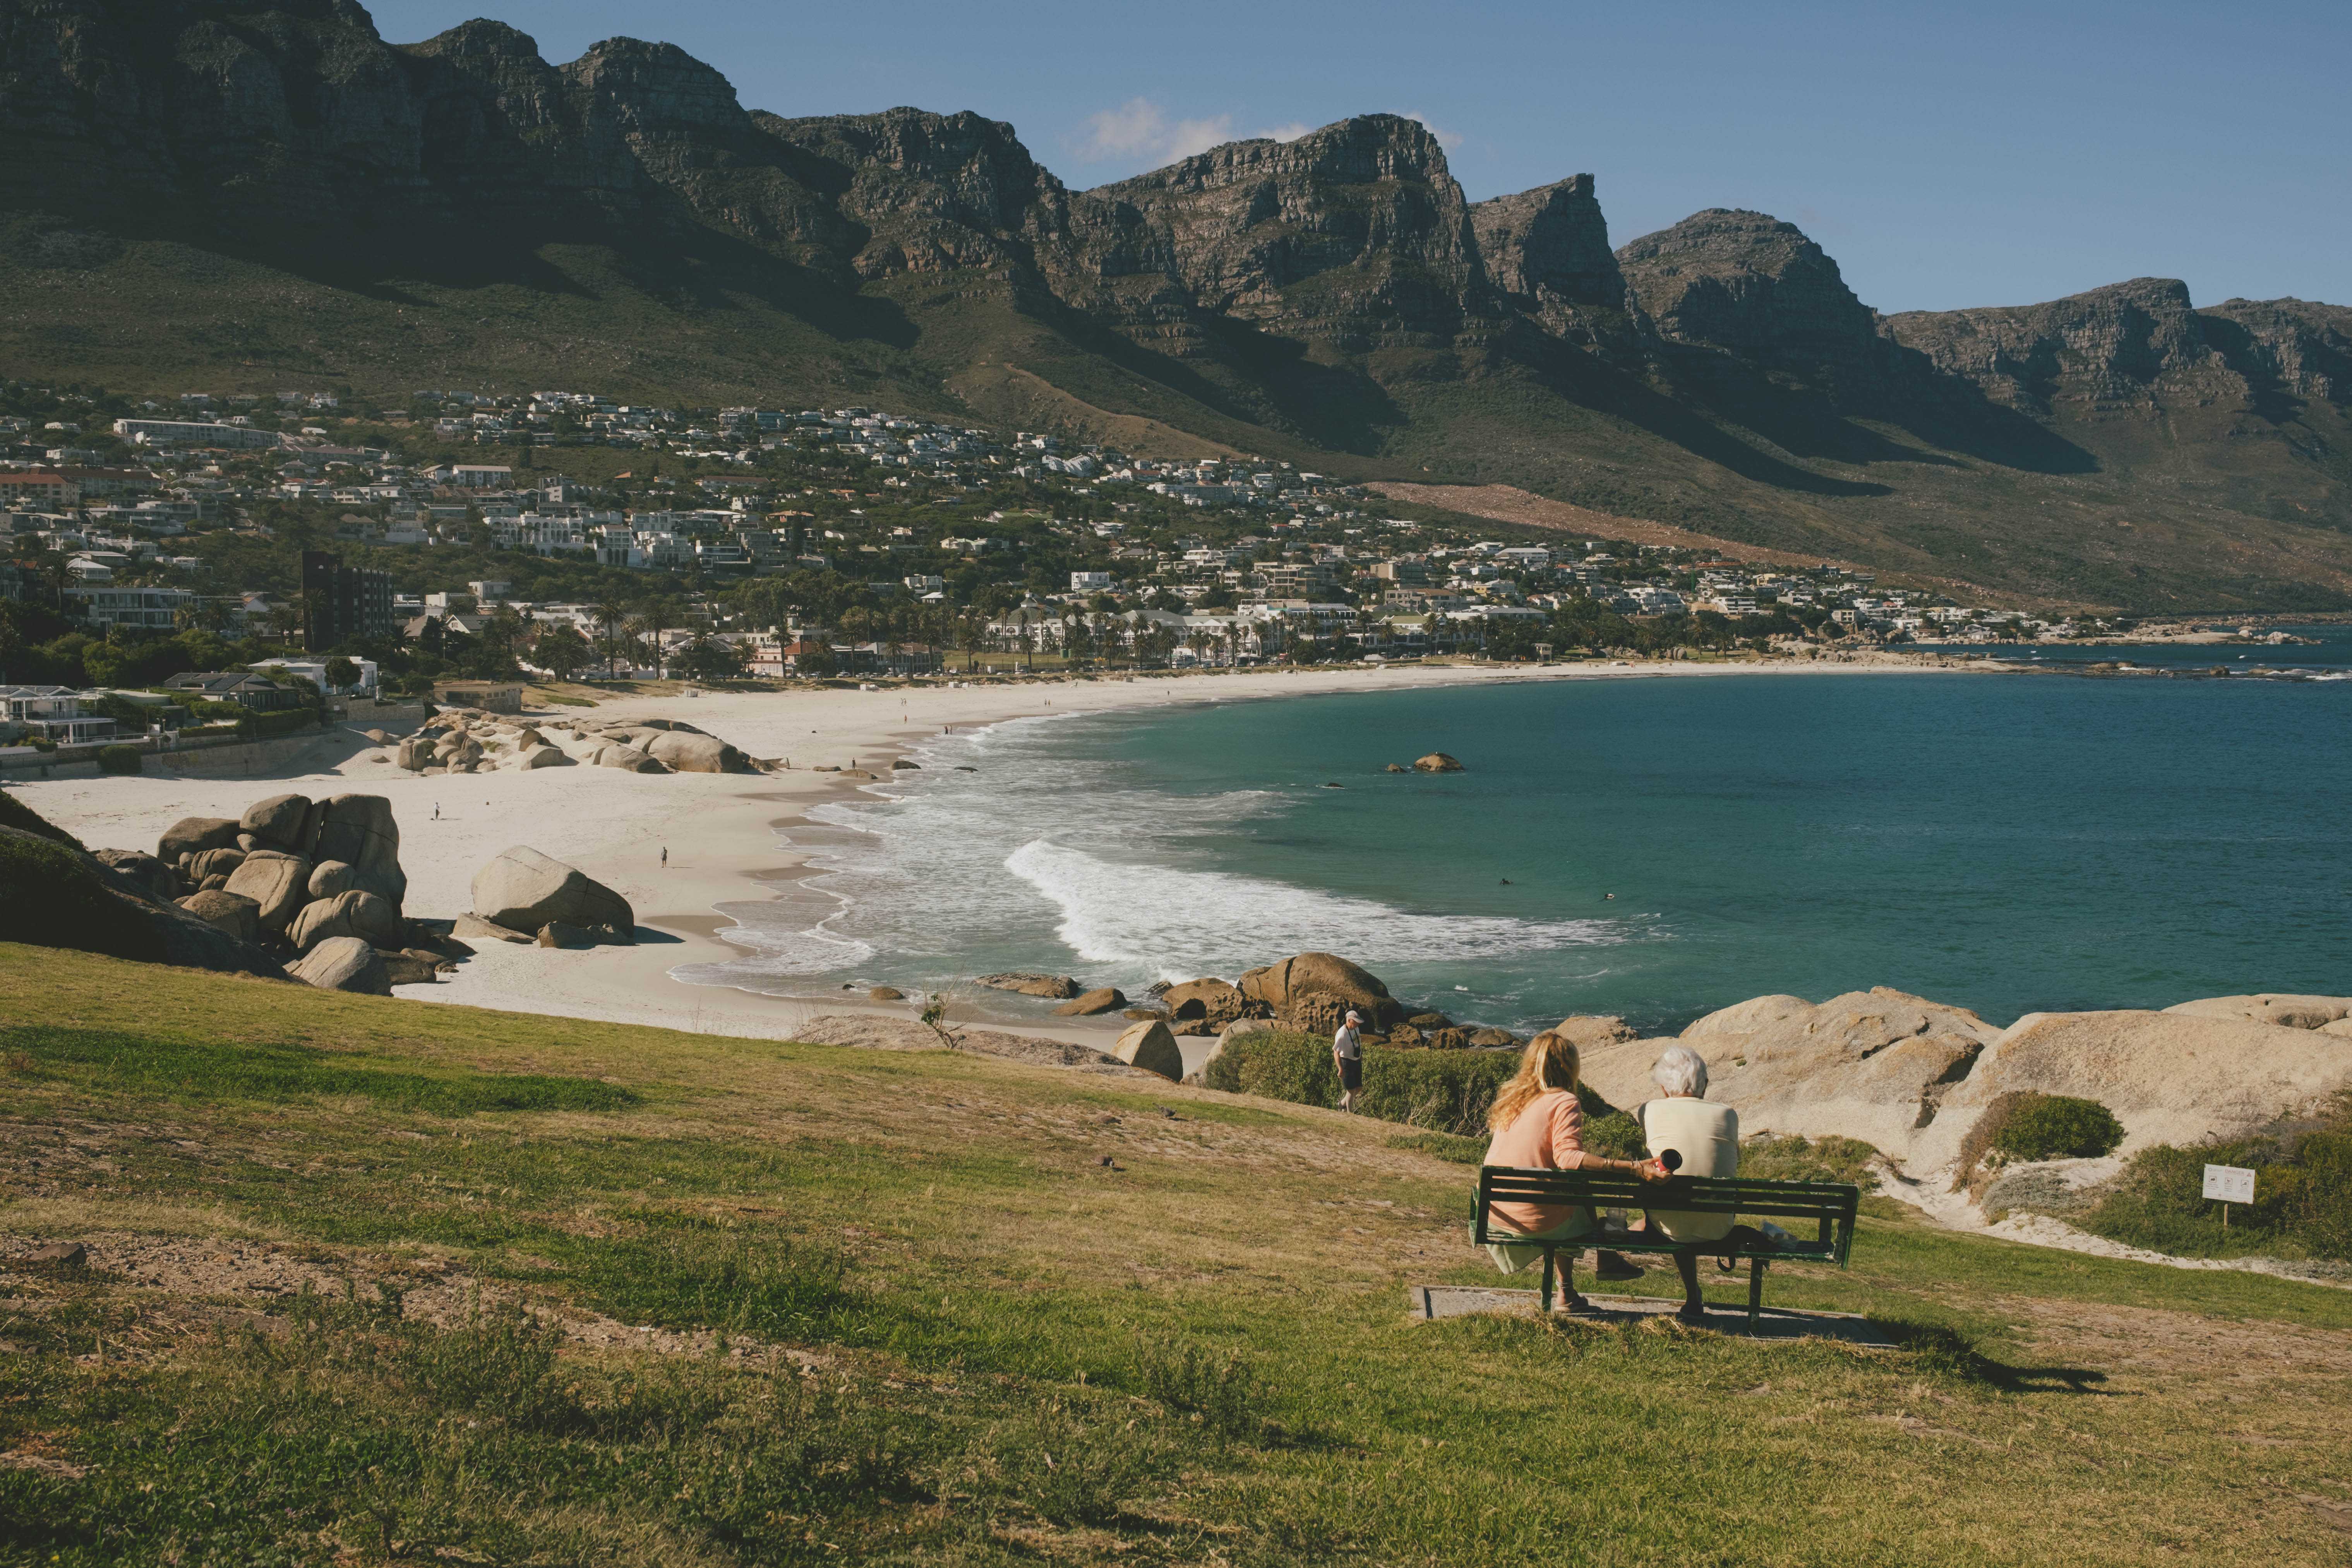 Two people sitting on a bench looking at the ocean in the Camps Bay neighborhood. The 12 Apostles mountains are in the background.